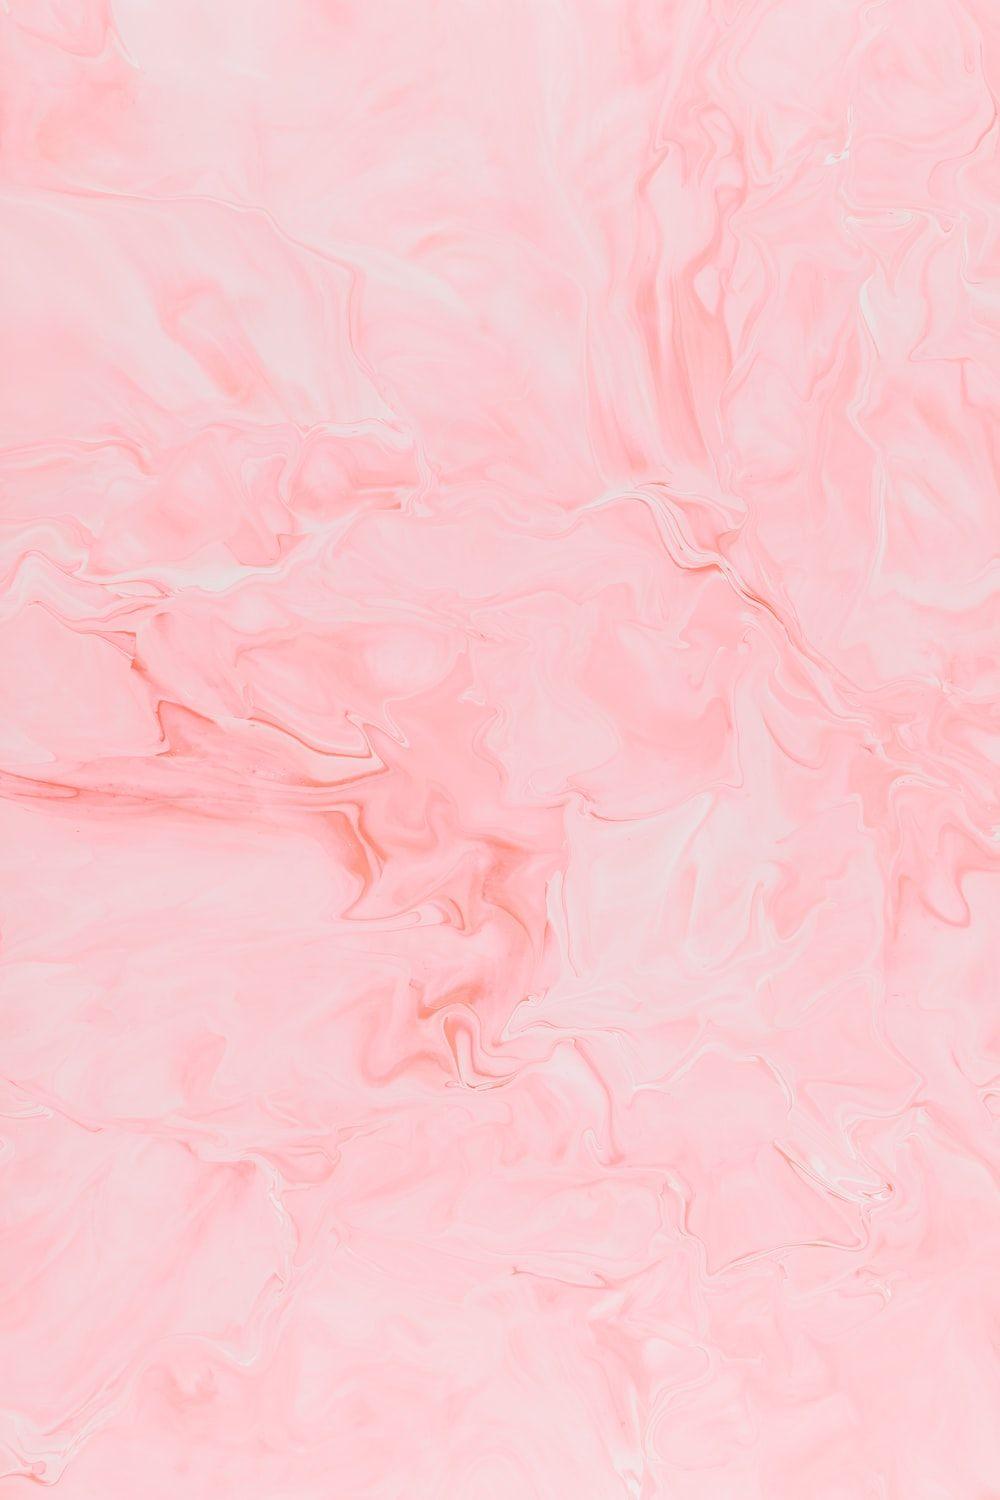 Solid Pastel Pink Wallpapers - Top Free Solid Pastel Pink Backgrounds ...